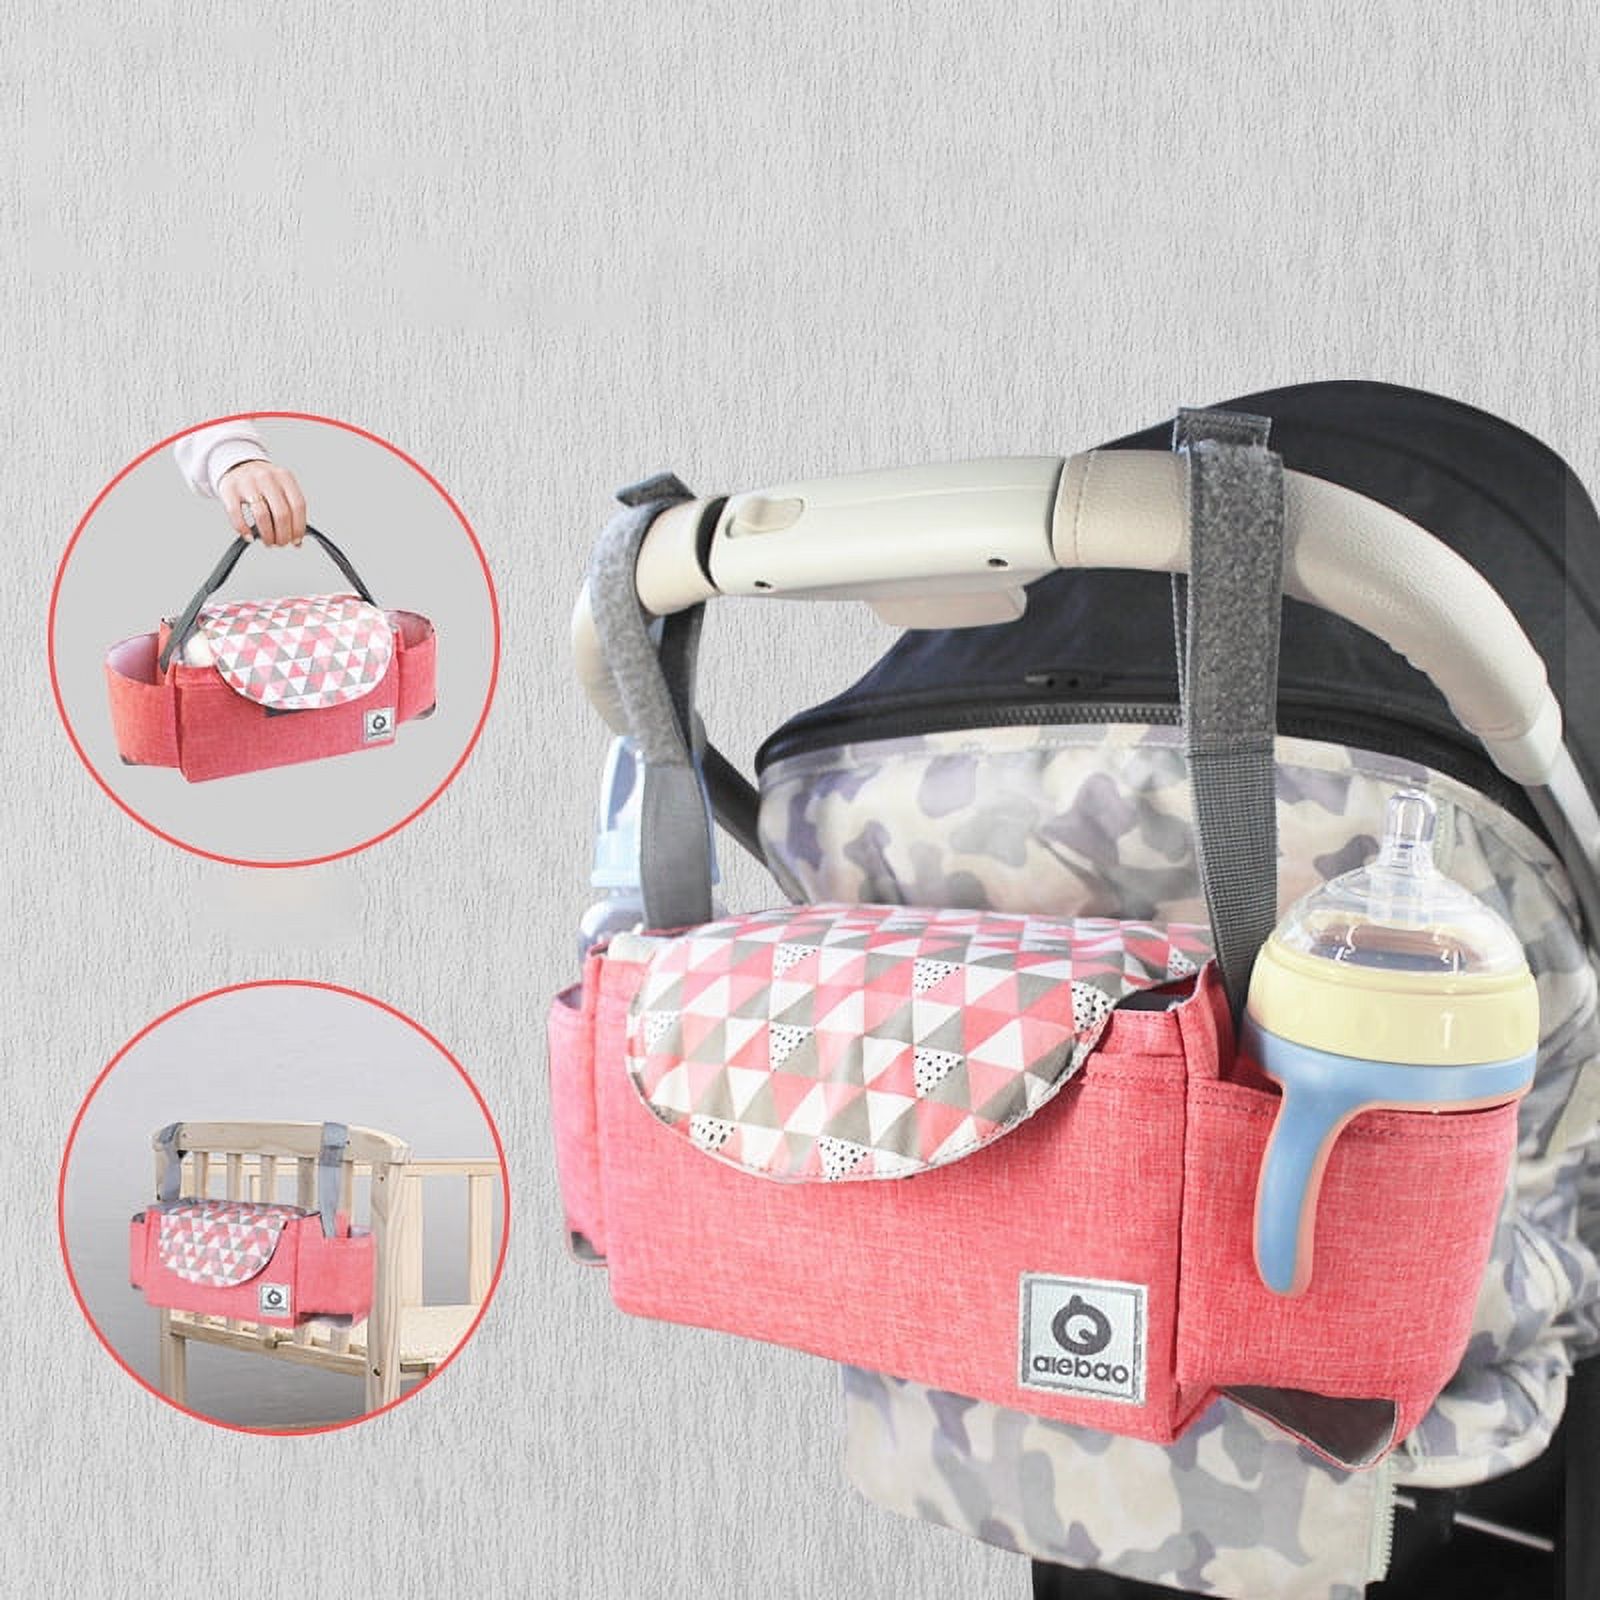 EIMELI Baby Stroller Organizer with Cup Holders and Diaper Bag,Stroller Accessories Organizer Bag,Large Storage Space Baby Travel Bag,Baby Stroller Hanging Bag, Fit Most Stroller Models -Pink - image 1 of 7